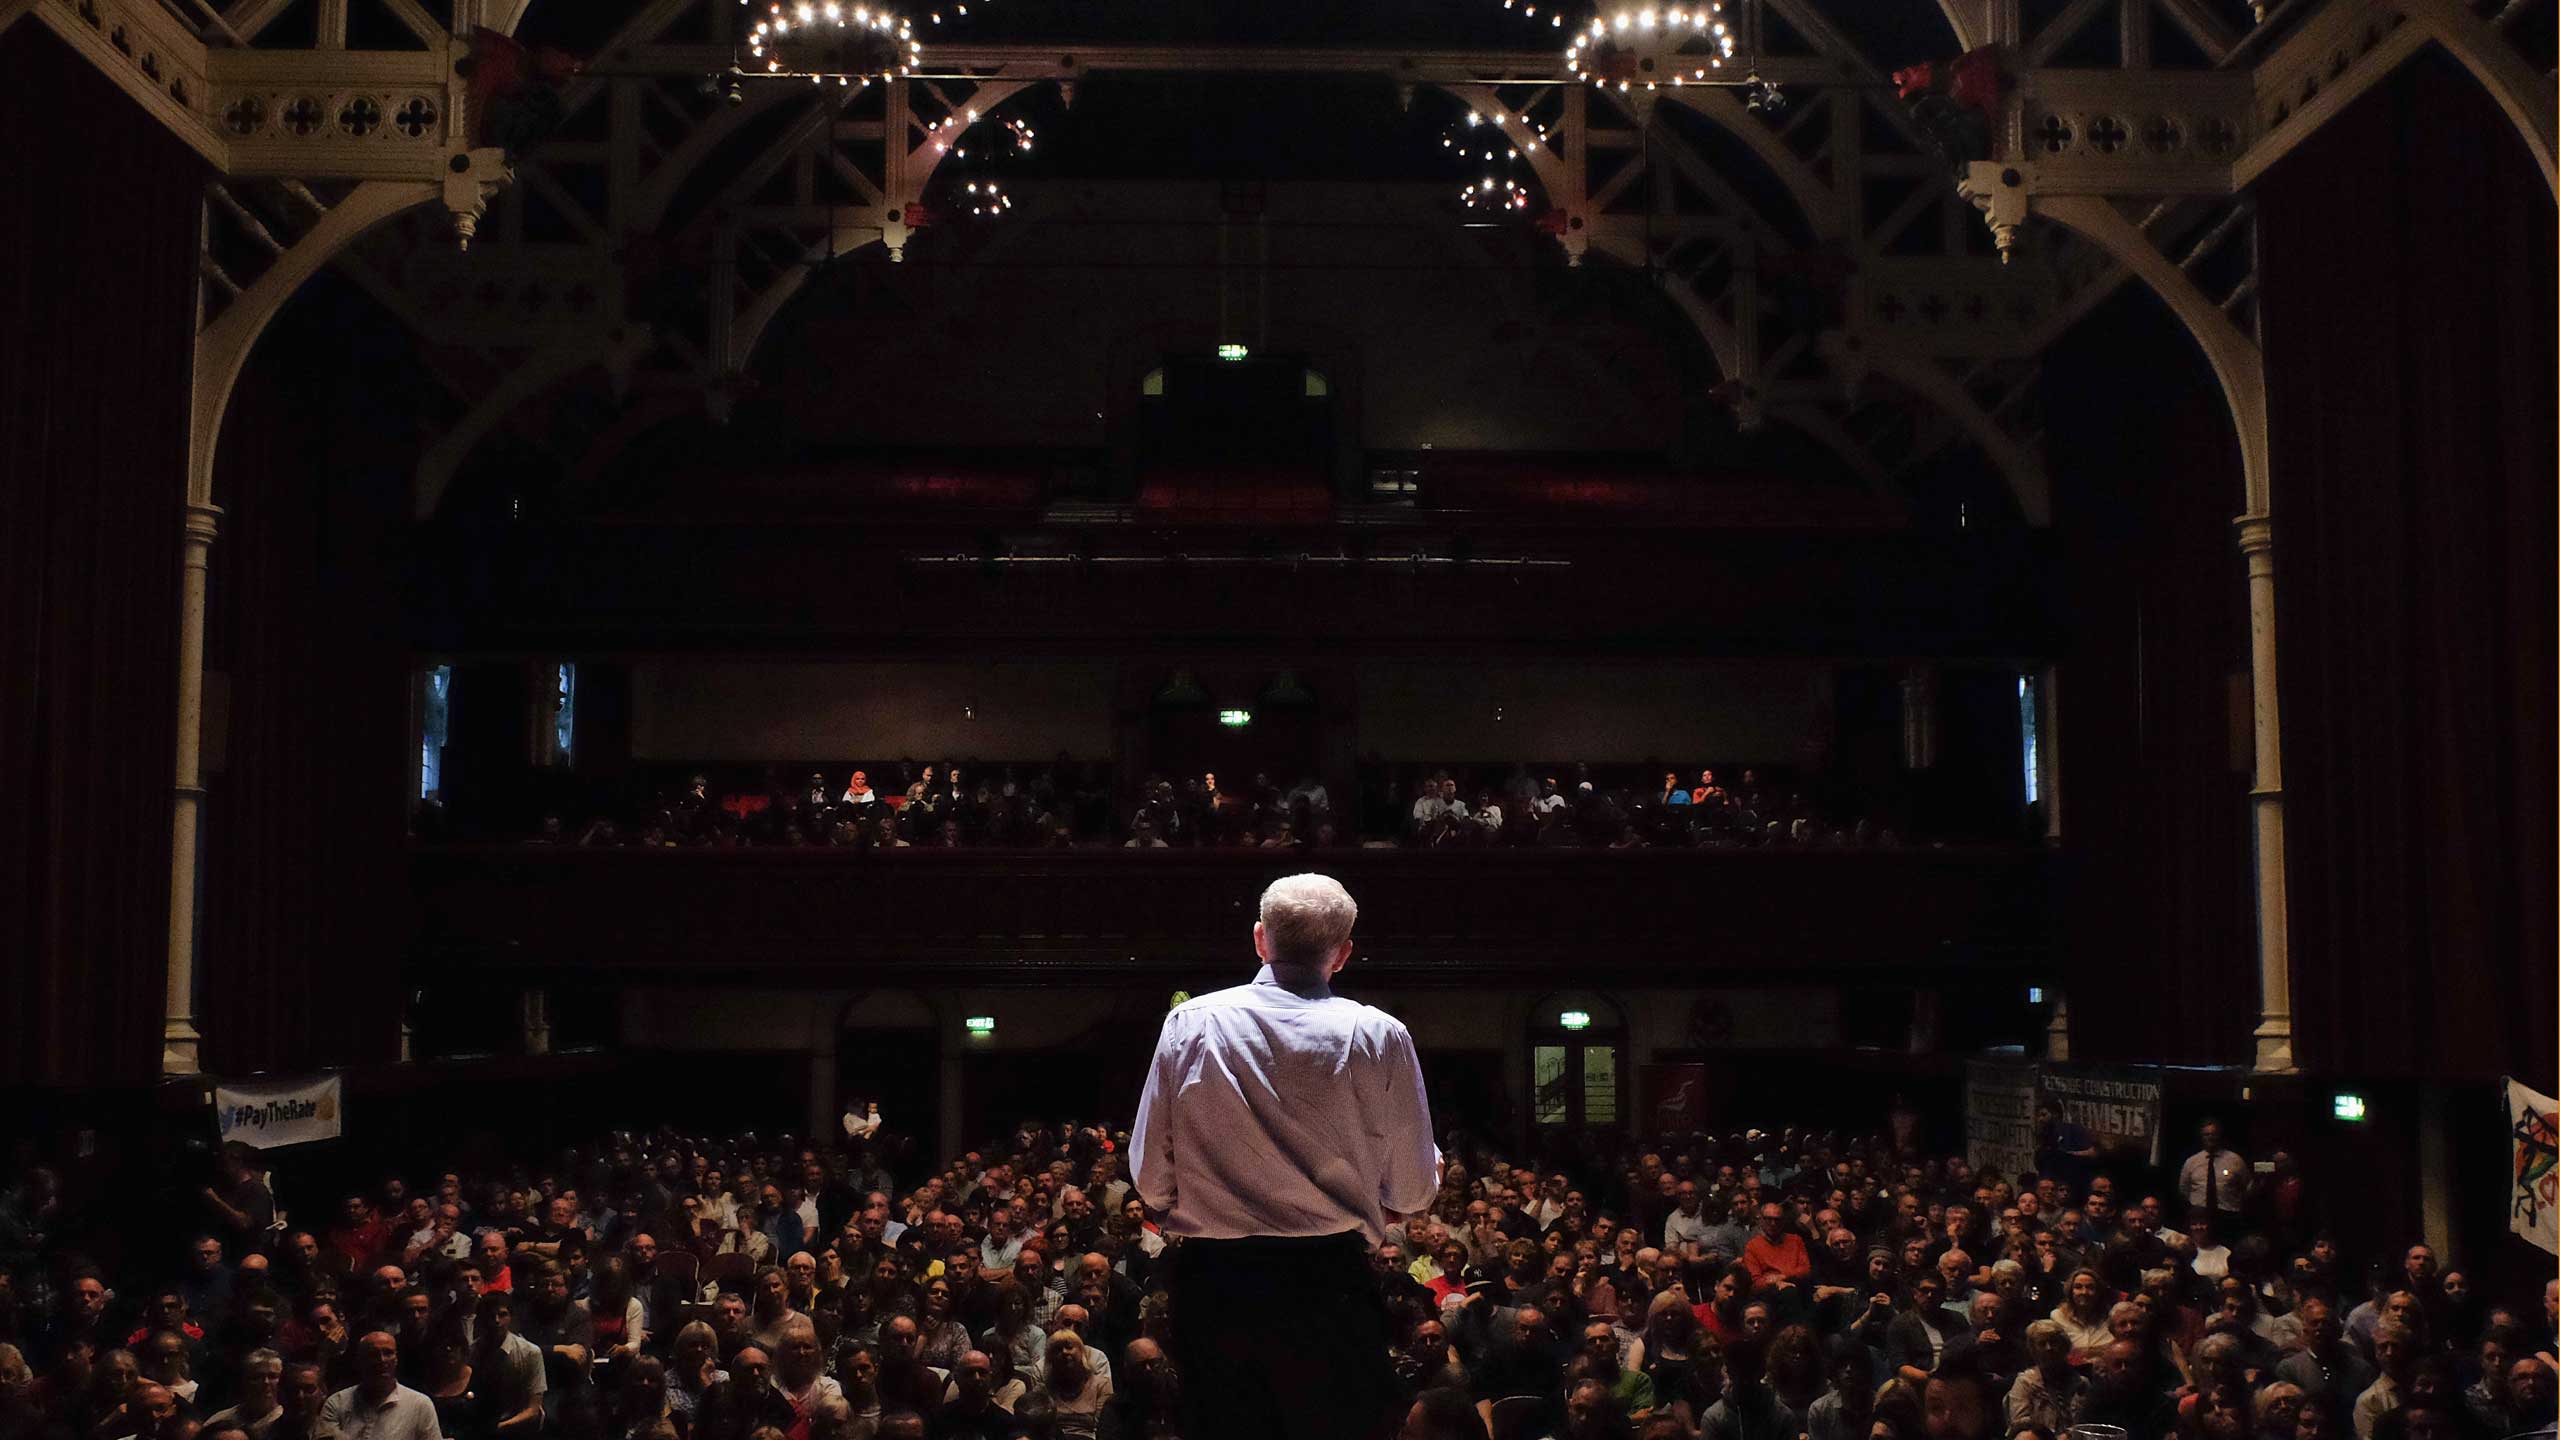 Jeremy Corbyn speaking to supporters in Middlesborough Town Hall during his leadership campaign - 18 August, 2015